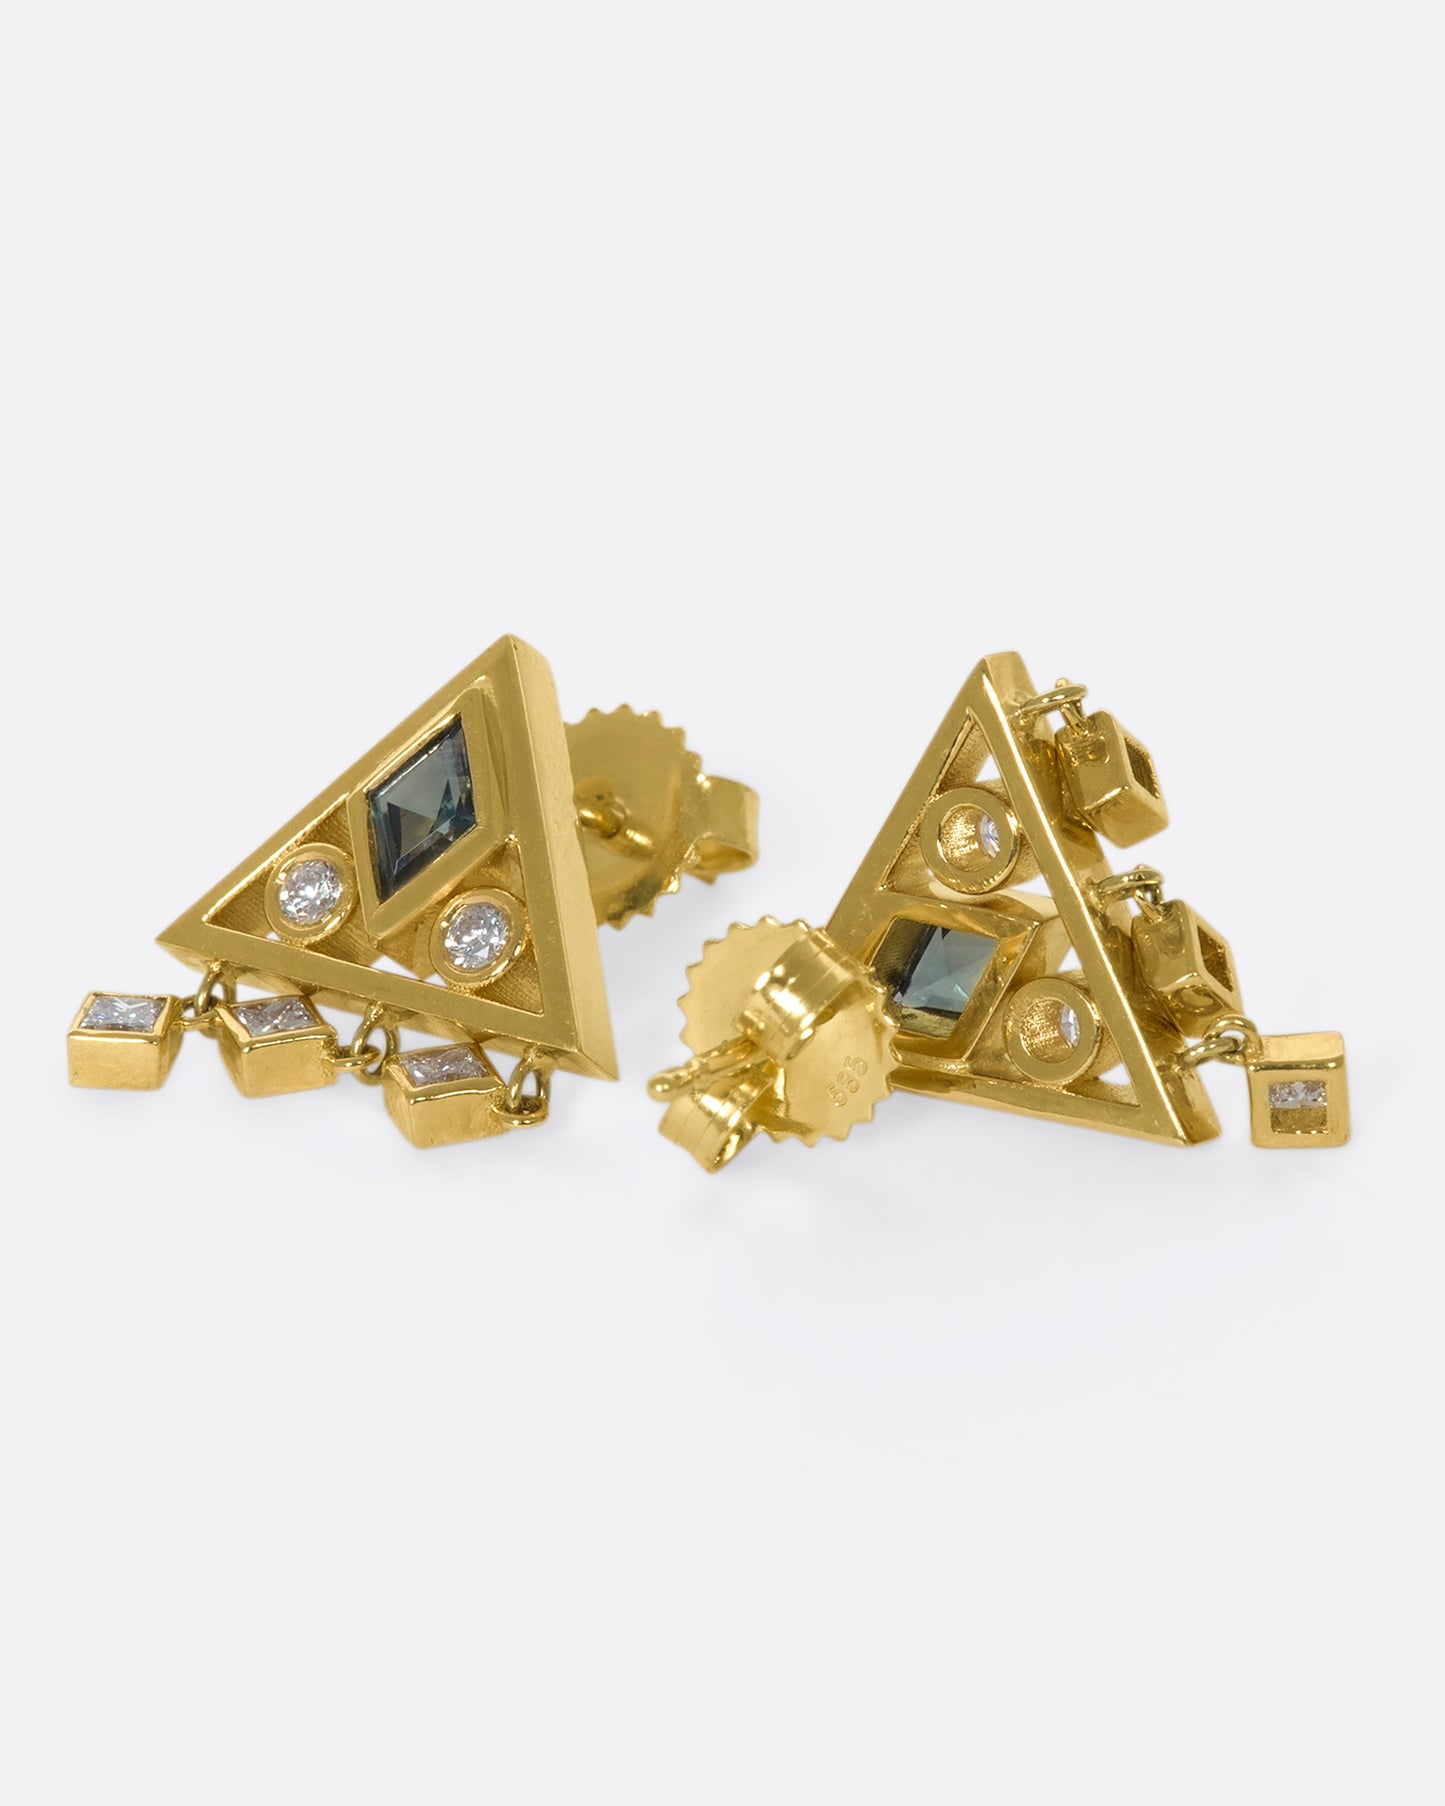 A gorgeously geometric pair of 14k gold triangle studs with teal sapphire lozenges and diamond accents